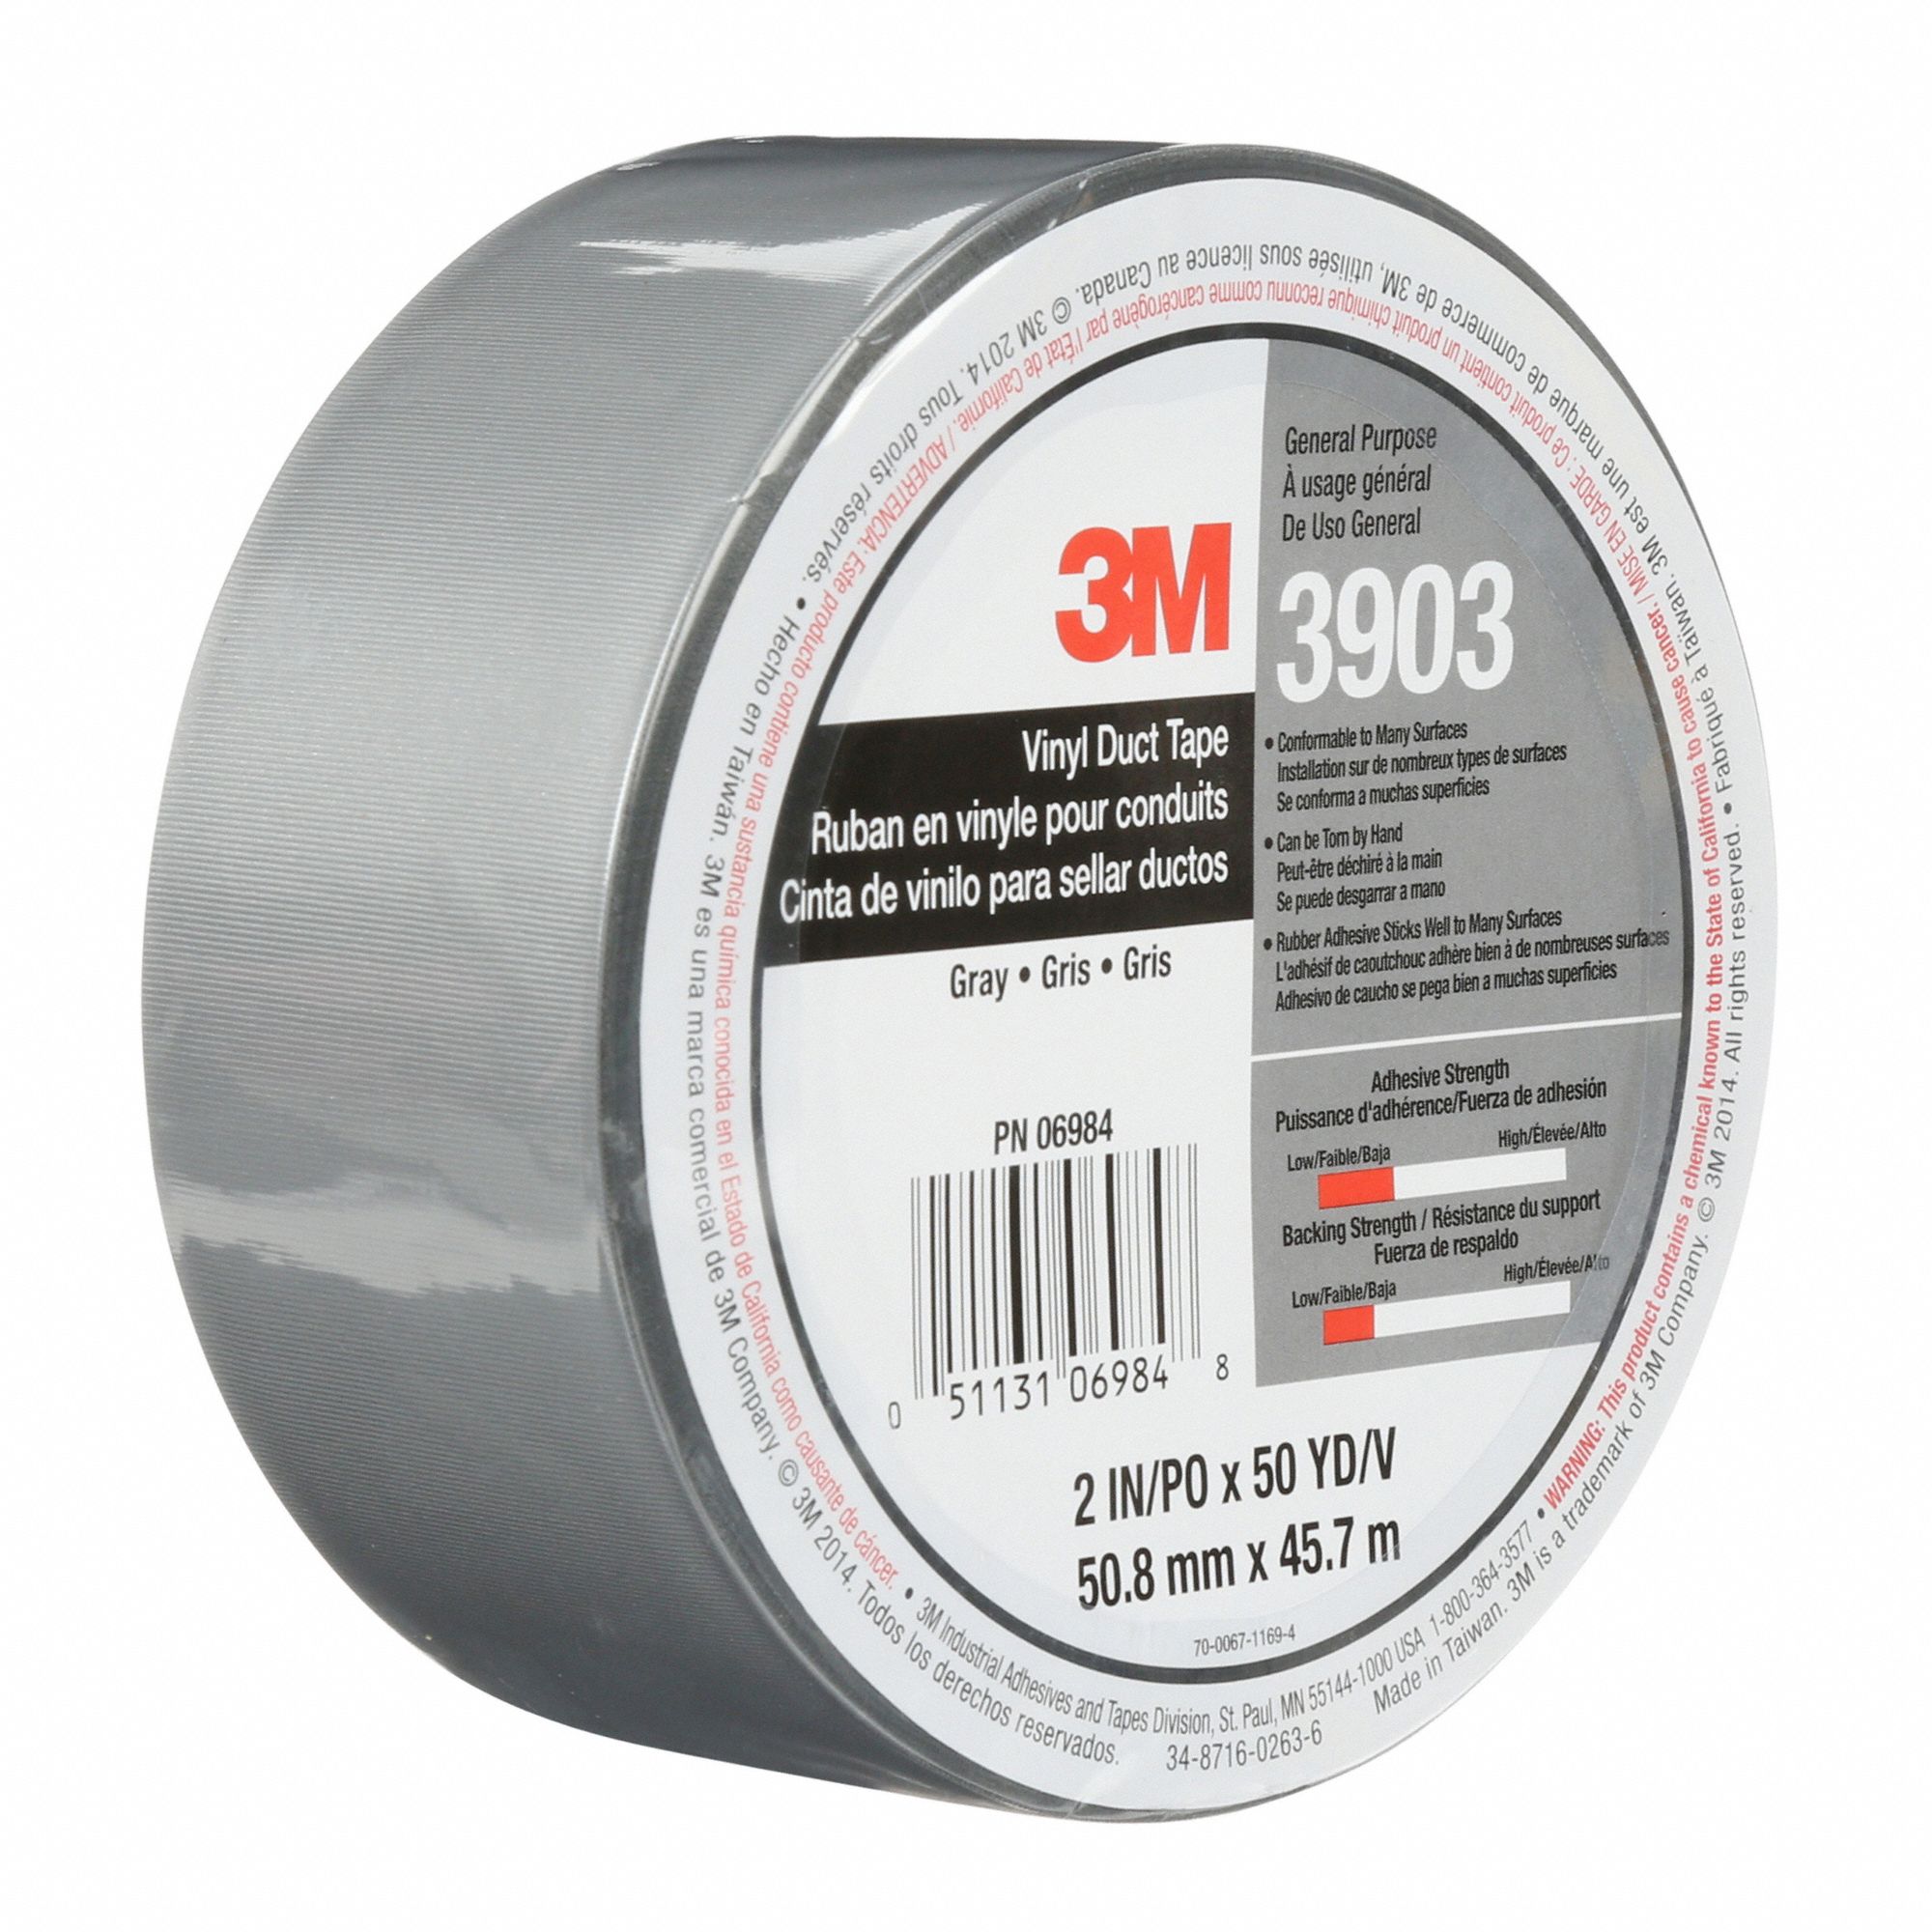 3M 3903 Vinyl Duct Tape x 150 ft Blue Rubber Adhesive Tape Roll with Abrasion 2 in Chemical Resistance Sealing Tapes 